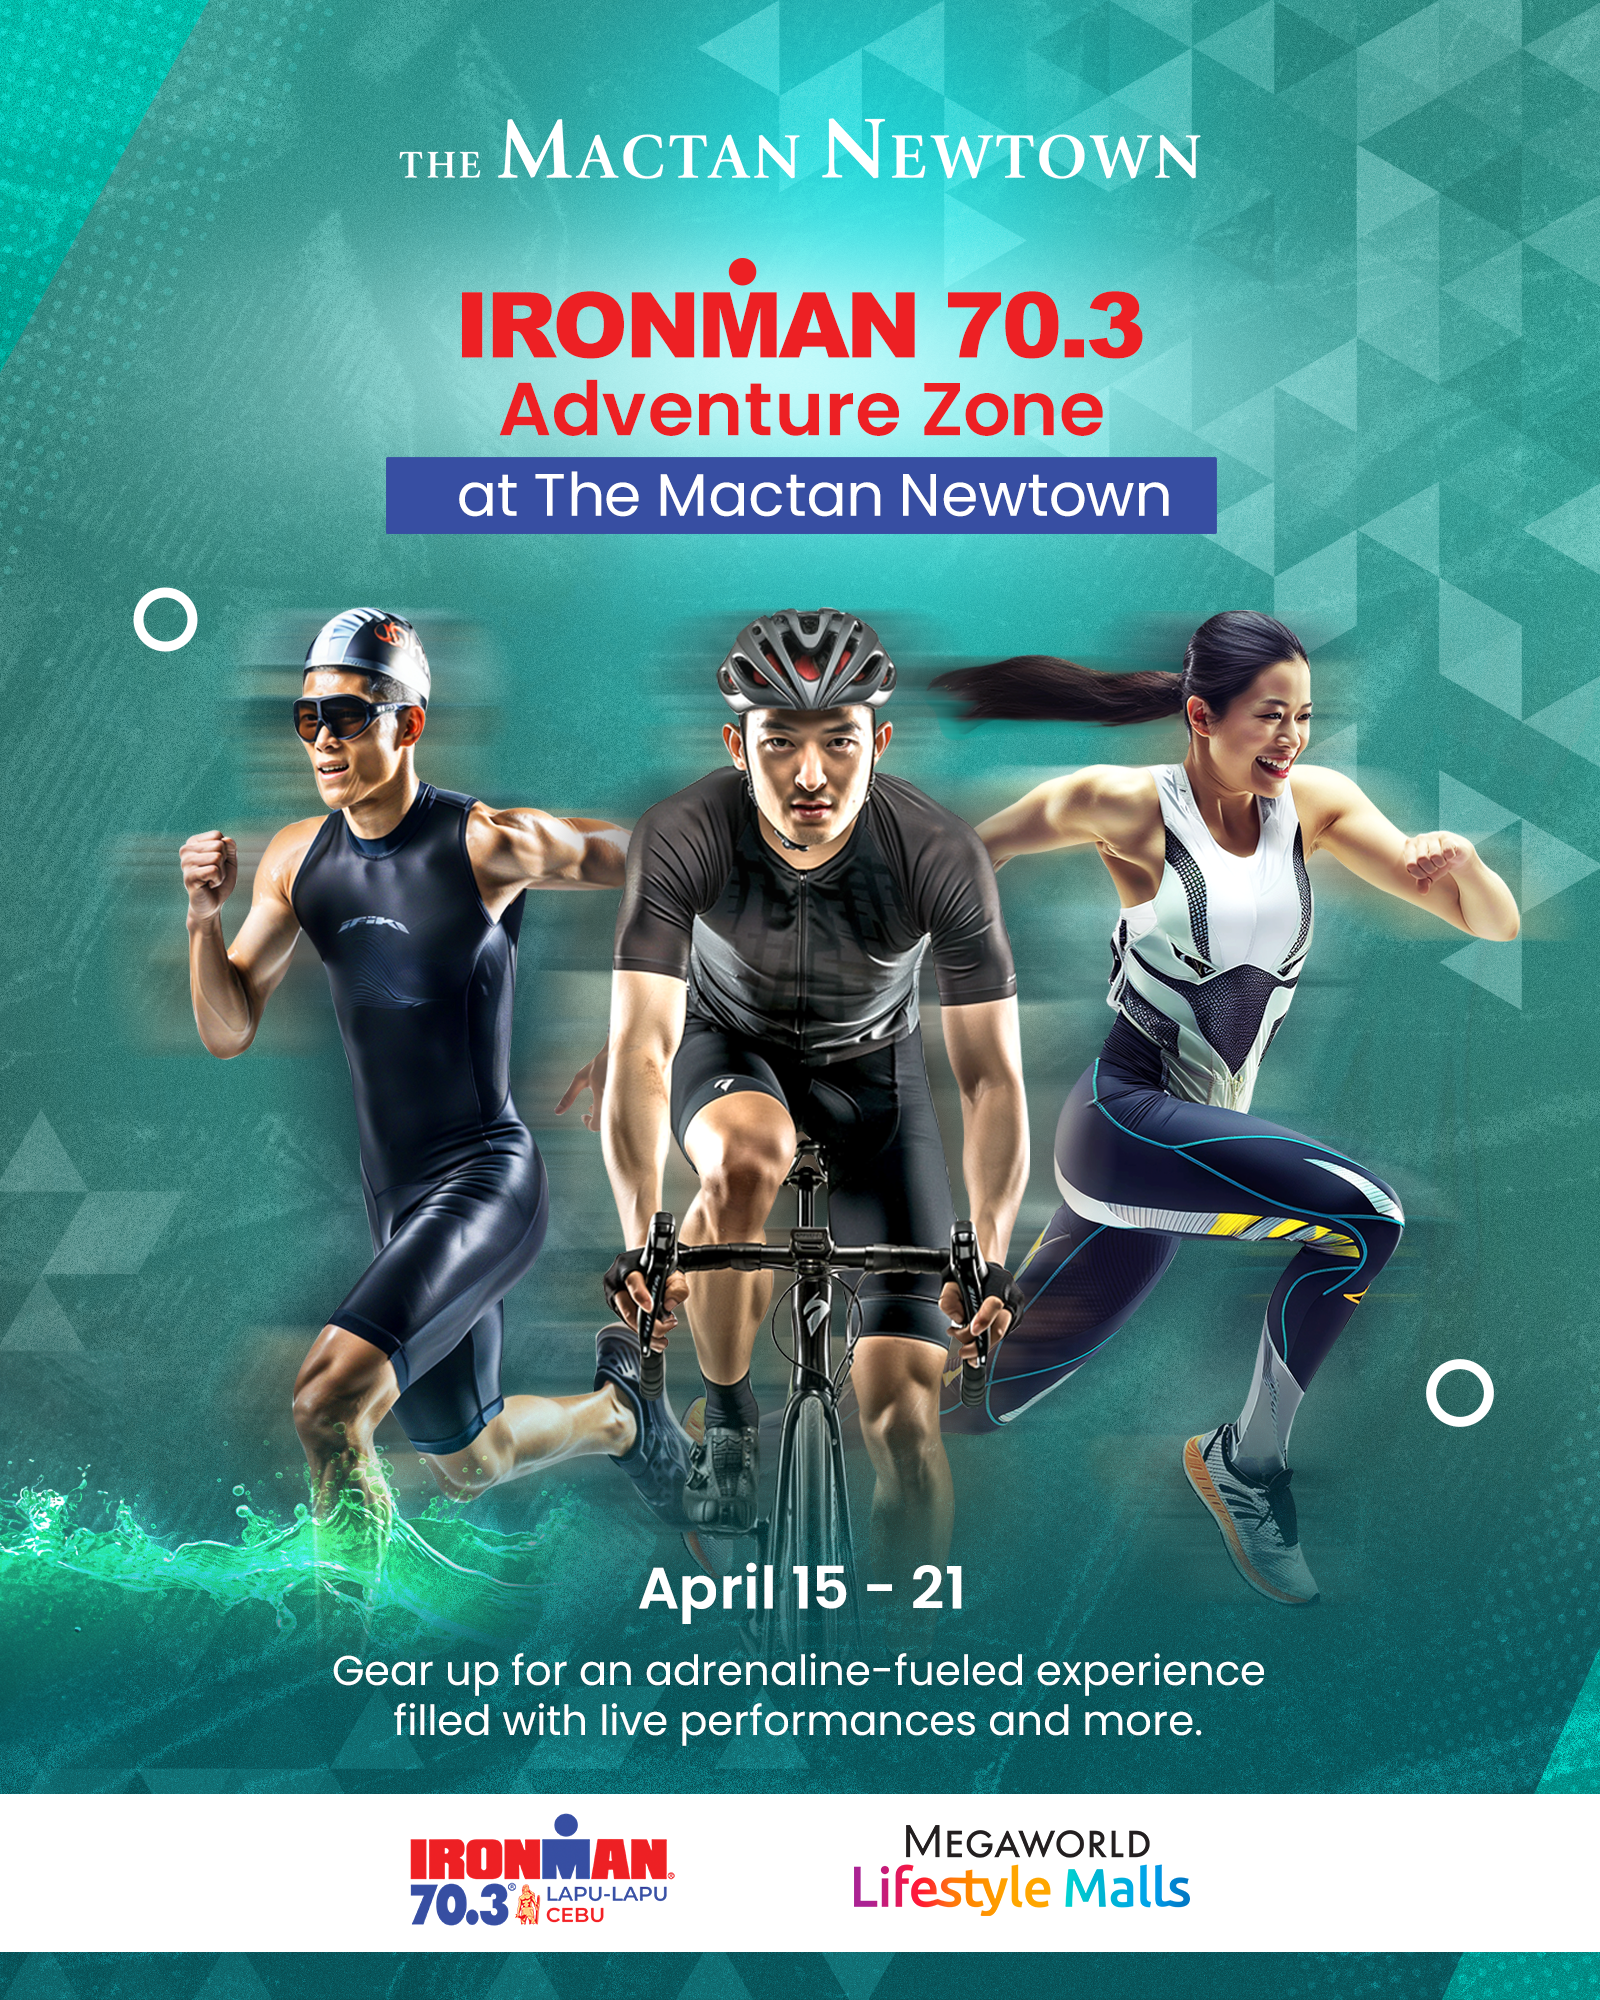 Celebrate the Ironman 70.3 Weekend with live concerts from your favorite local bands